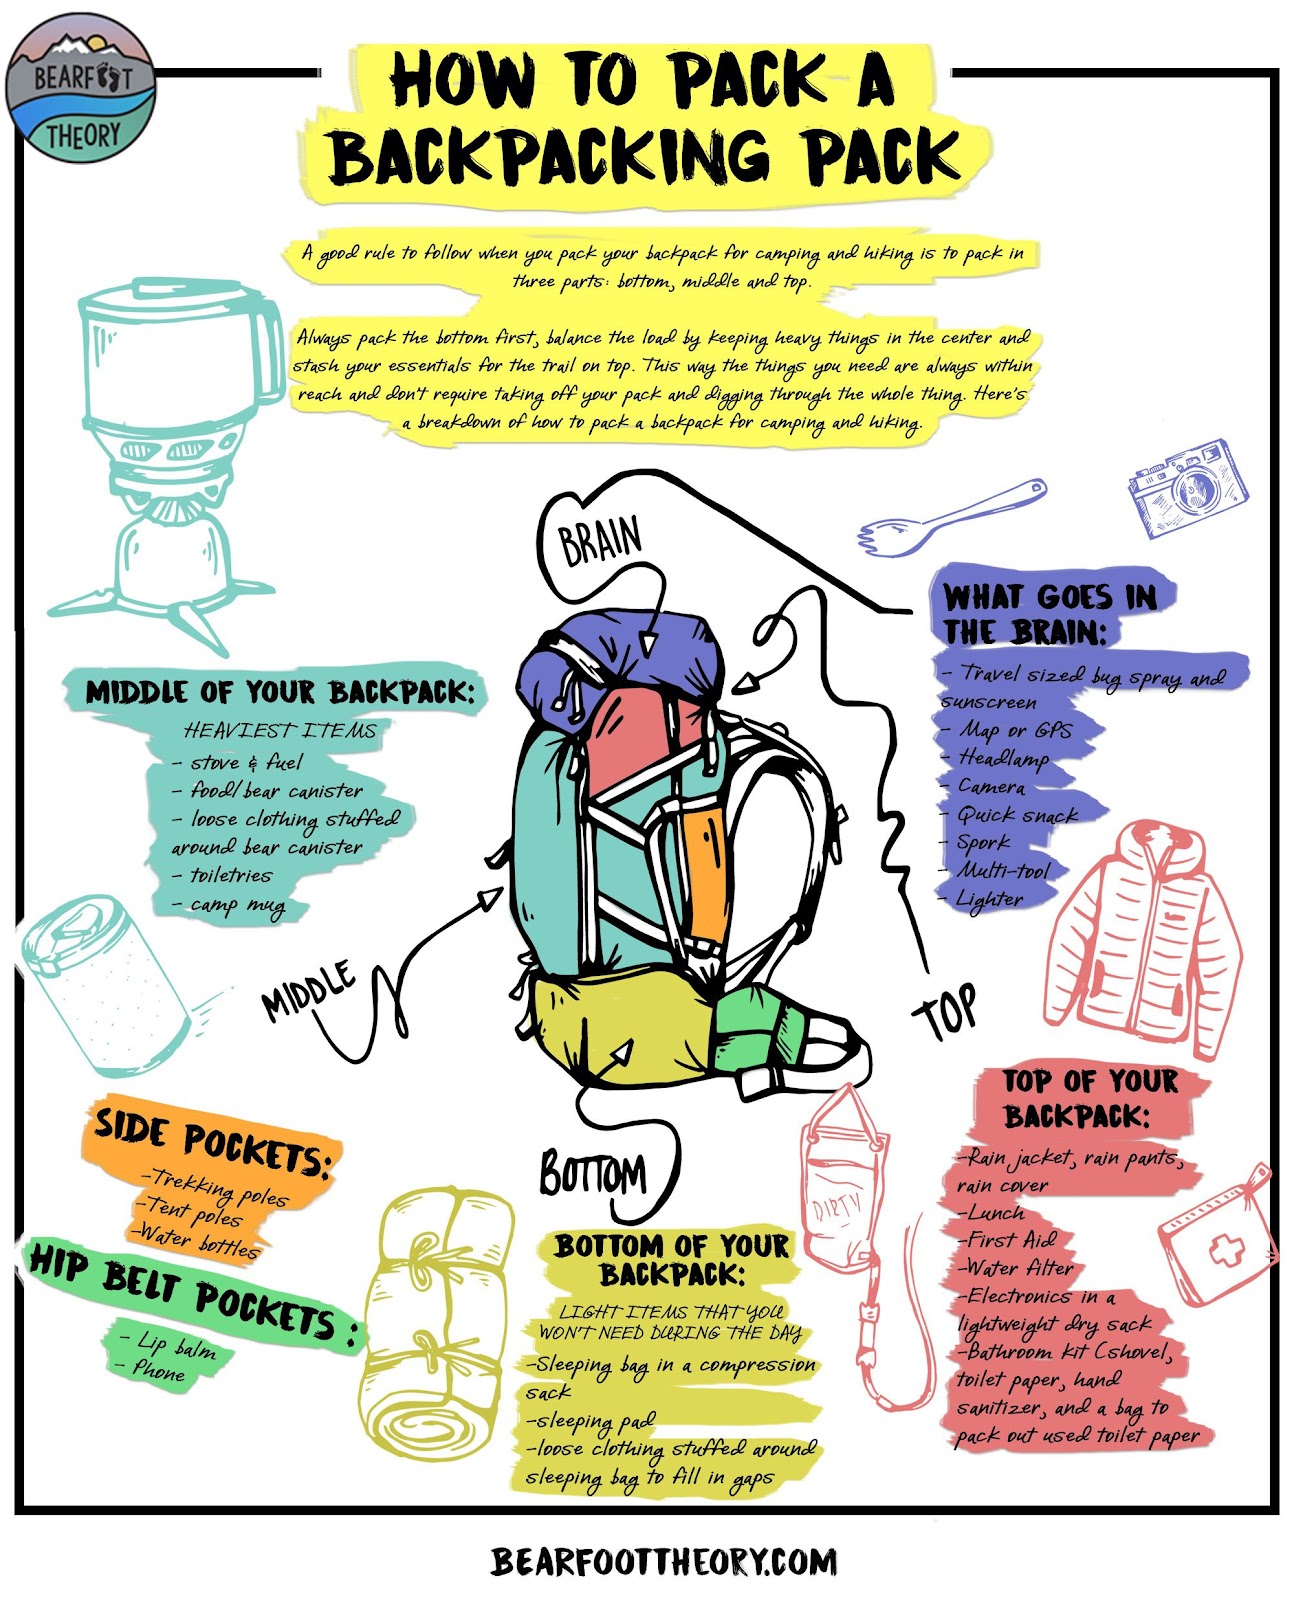 How to Pack a Hiking Backpack [Tips and Infographic]